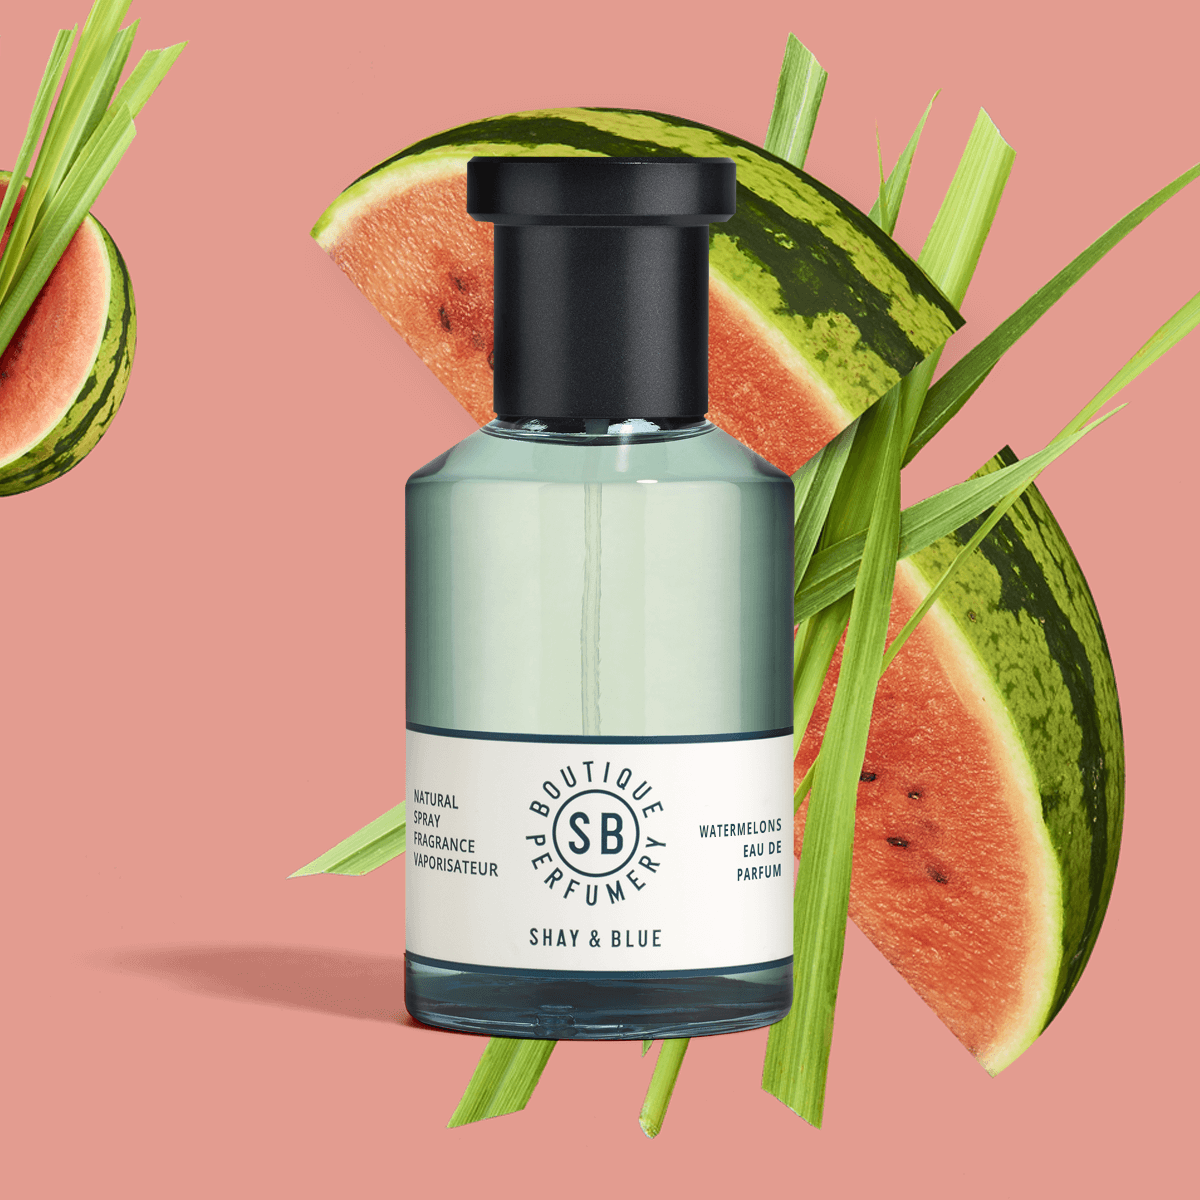 Watermelons Fragrance 100ml | Watermelon freshness with green mandarin and cut grass. | Clean All Gender Fragrance | Shay & Blue